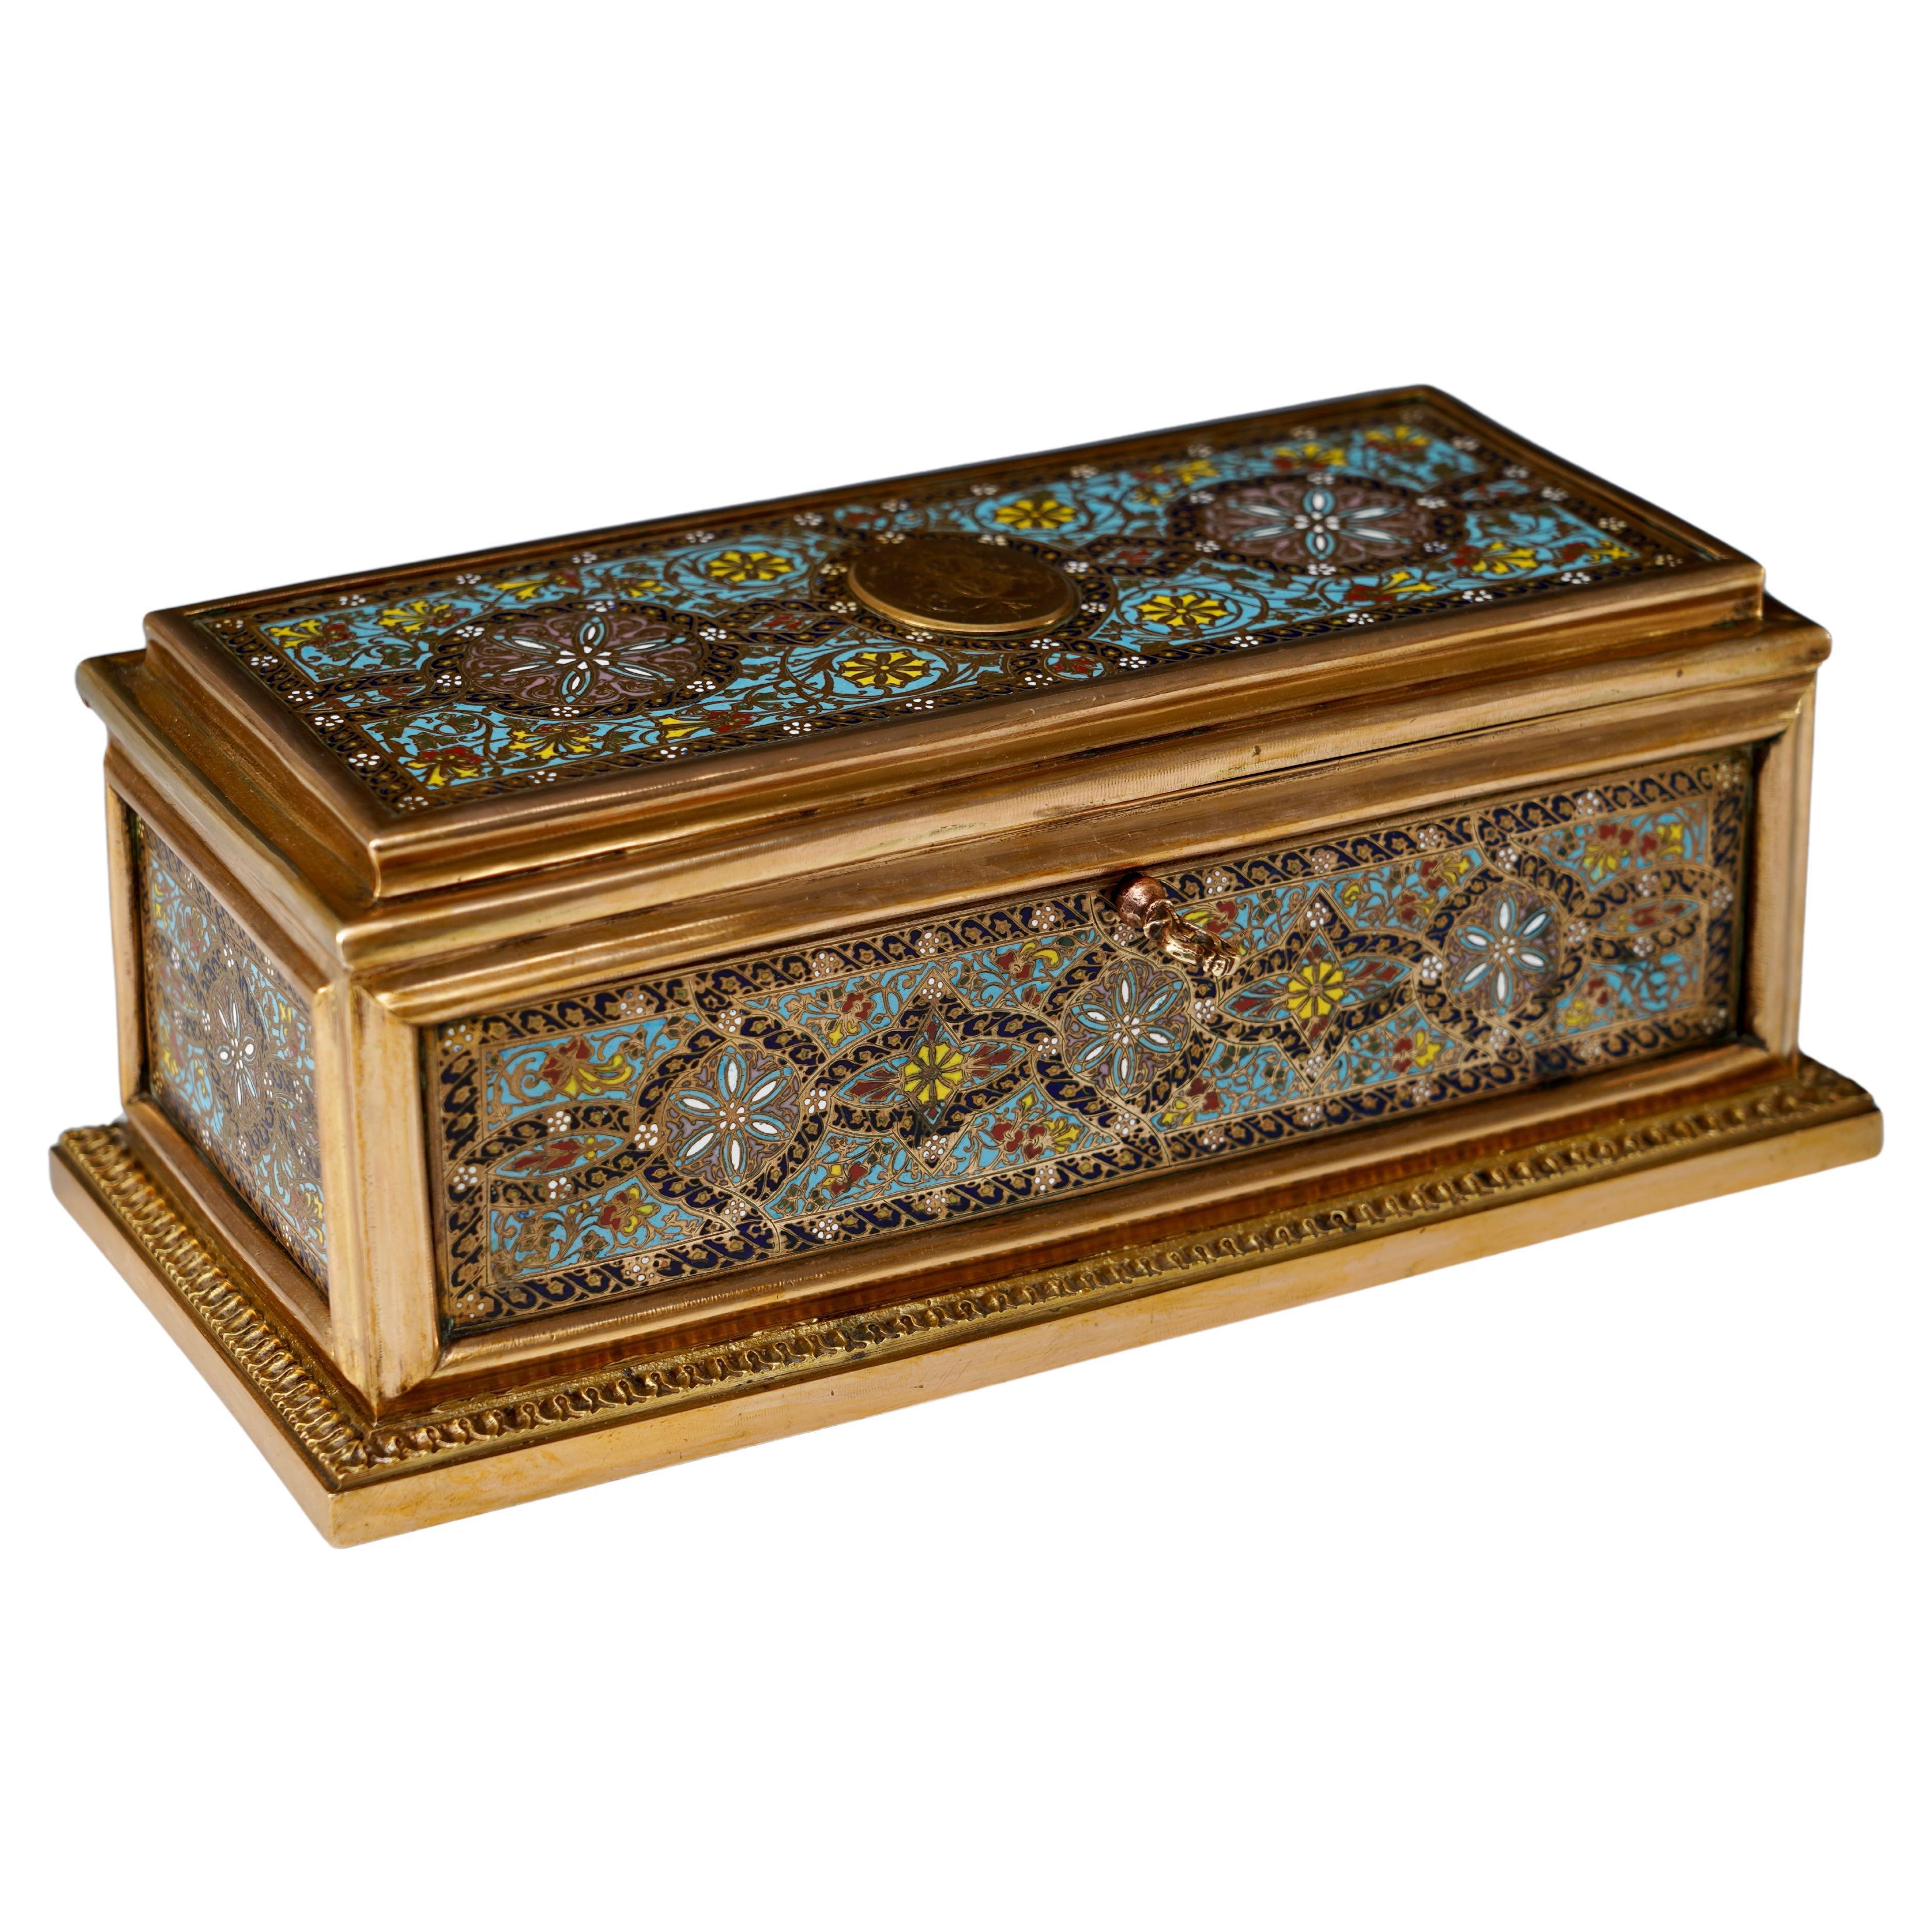 Charming Enameled and Gilded Bronze Casket by Tahan, France, Circa 1870 For Sale